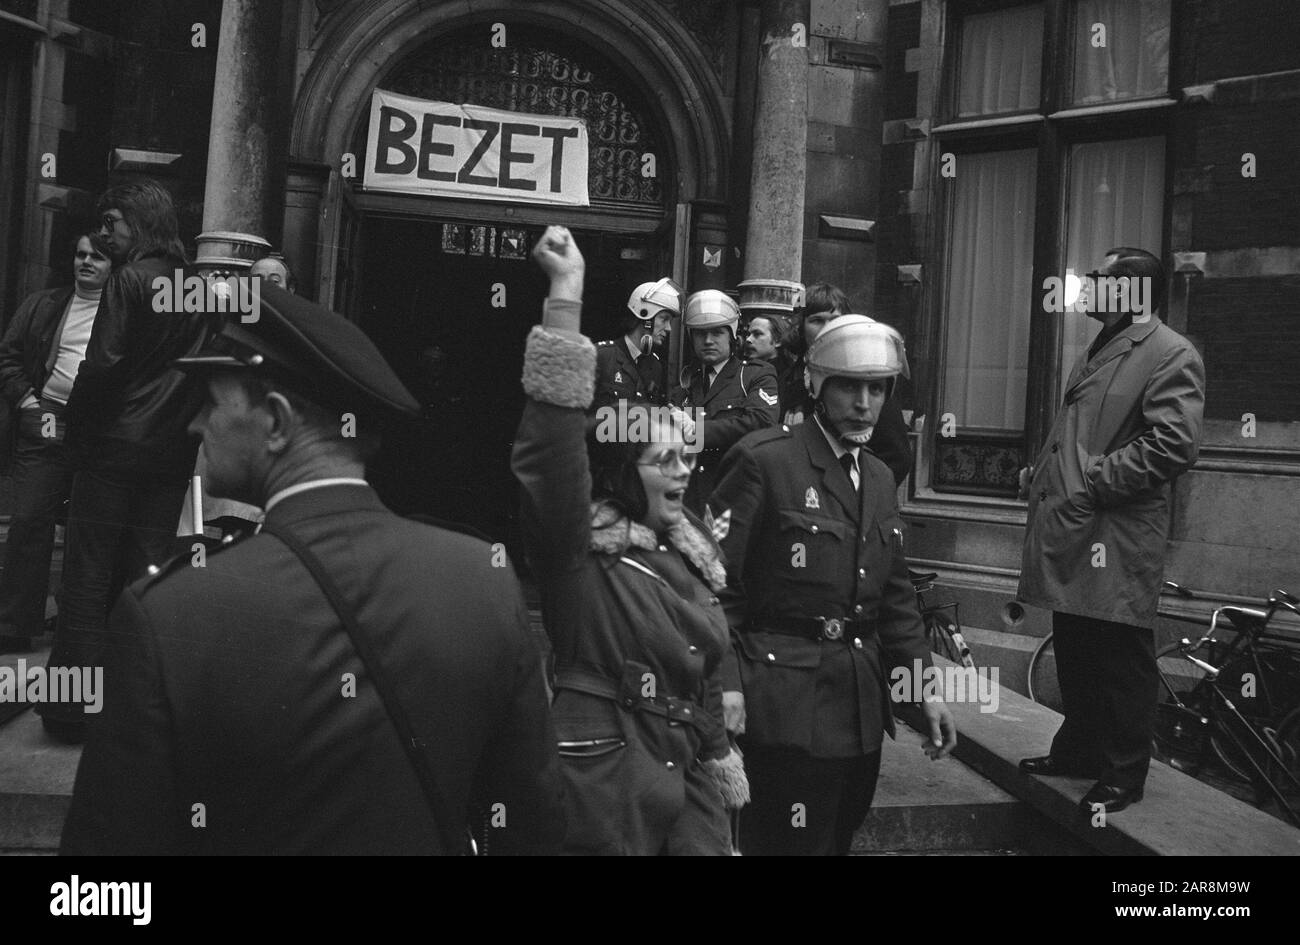 Students removed from Utrecht University, helmeted policemen carry girl outside Date: February 15, 1973 Location: Utrecht Keywords: POLICE, STUDENTS, girls, universities Stock Photo